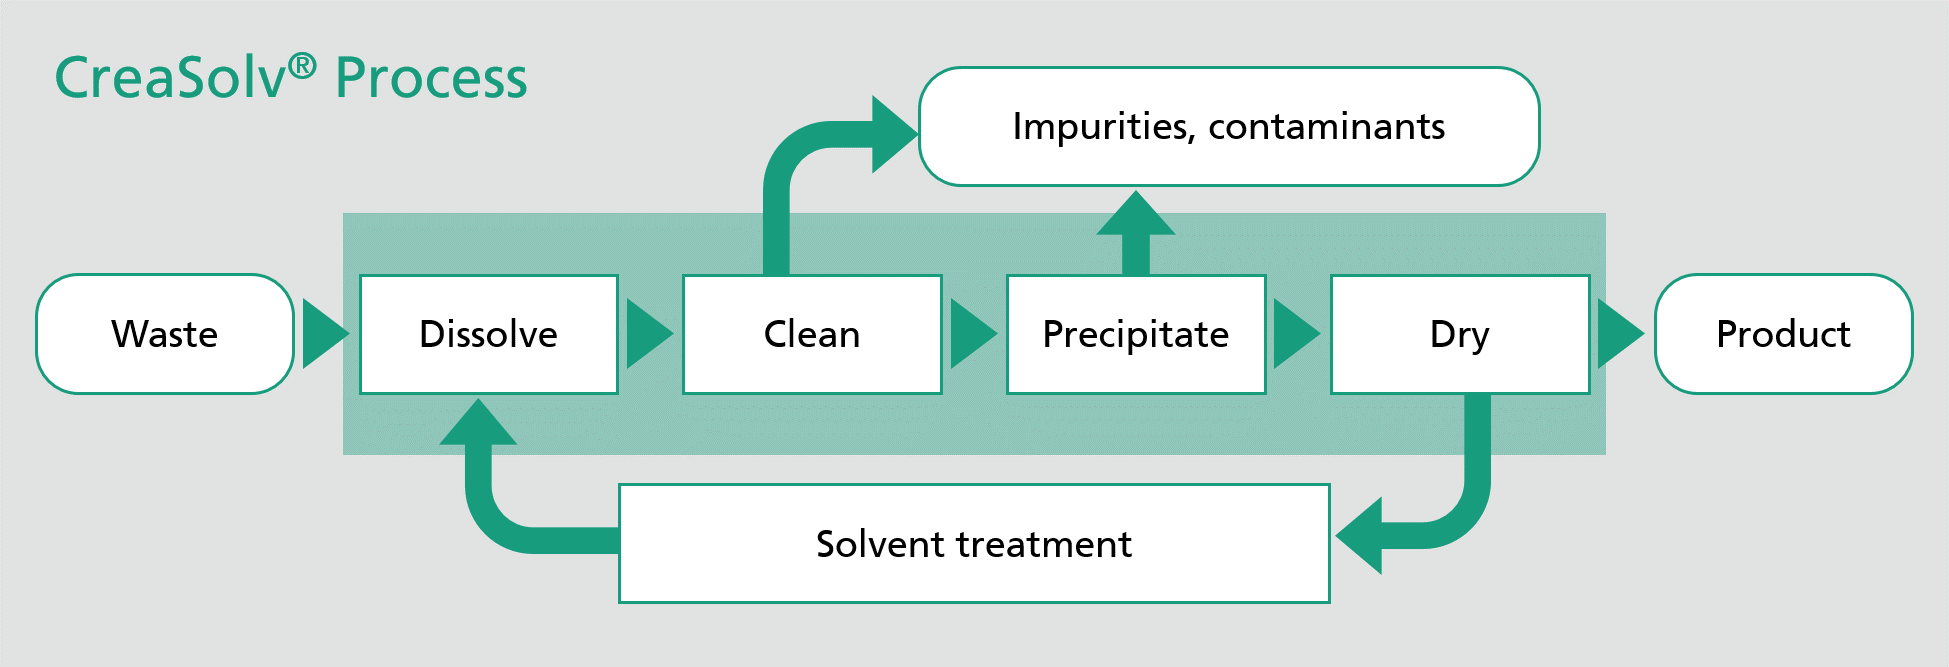 Flow diagramm of the CreaSolv Process